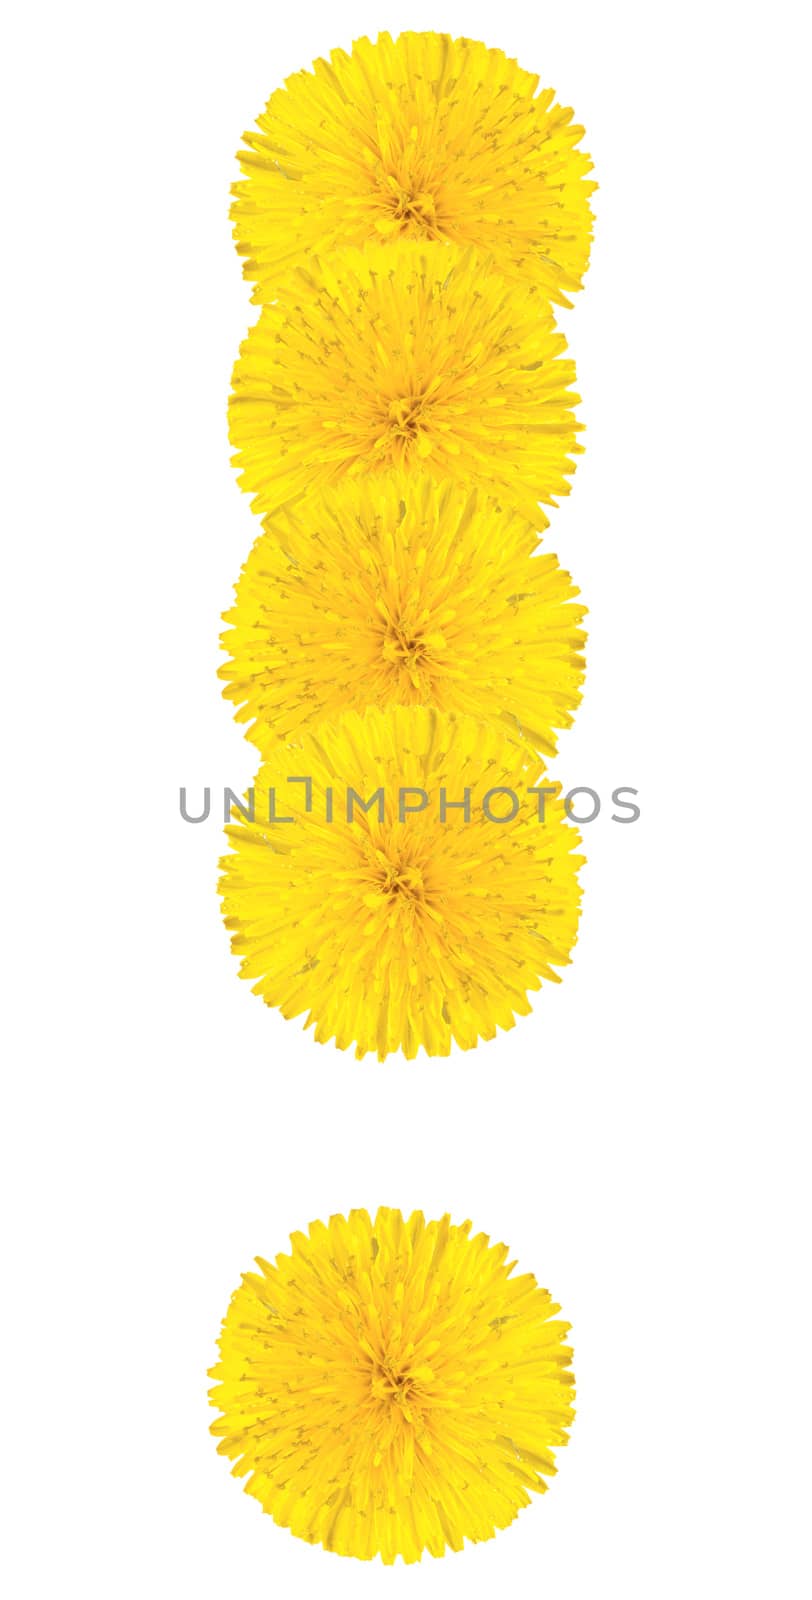 Exclamation sing made from dandelion flower by Valengilda